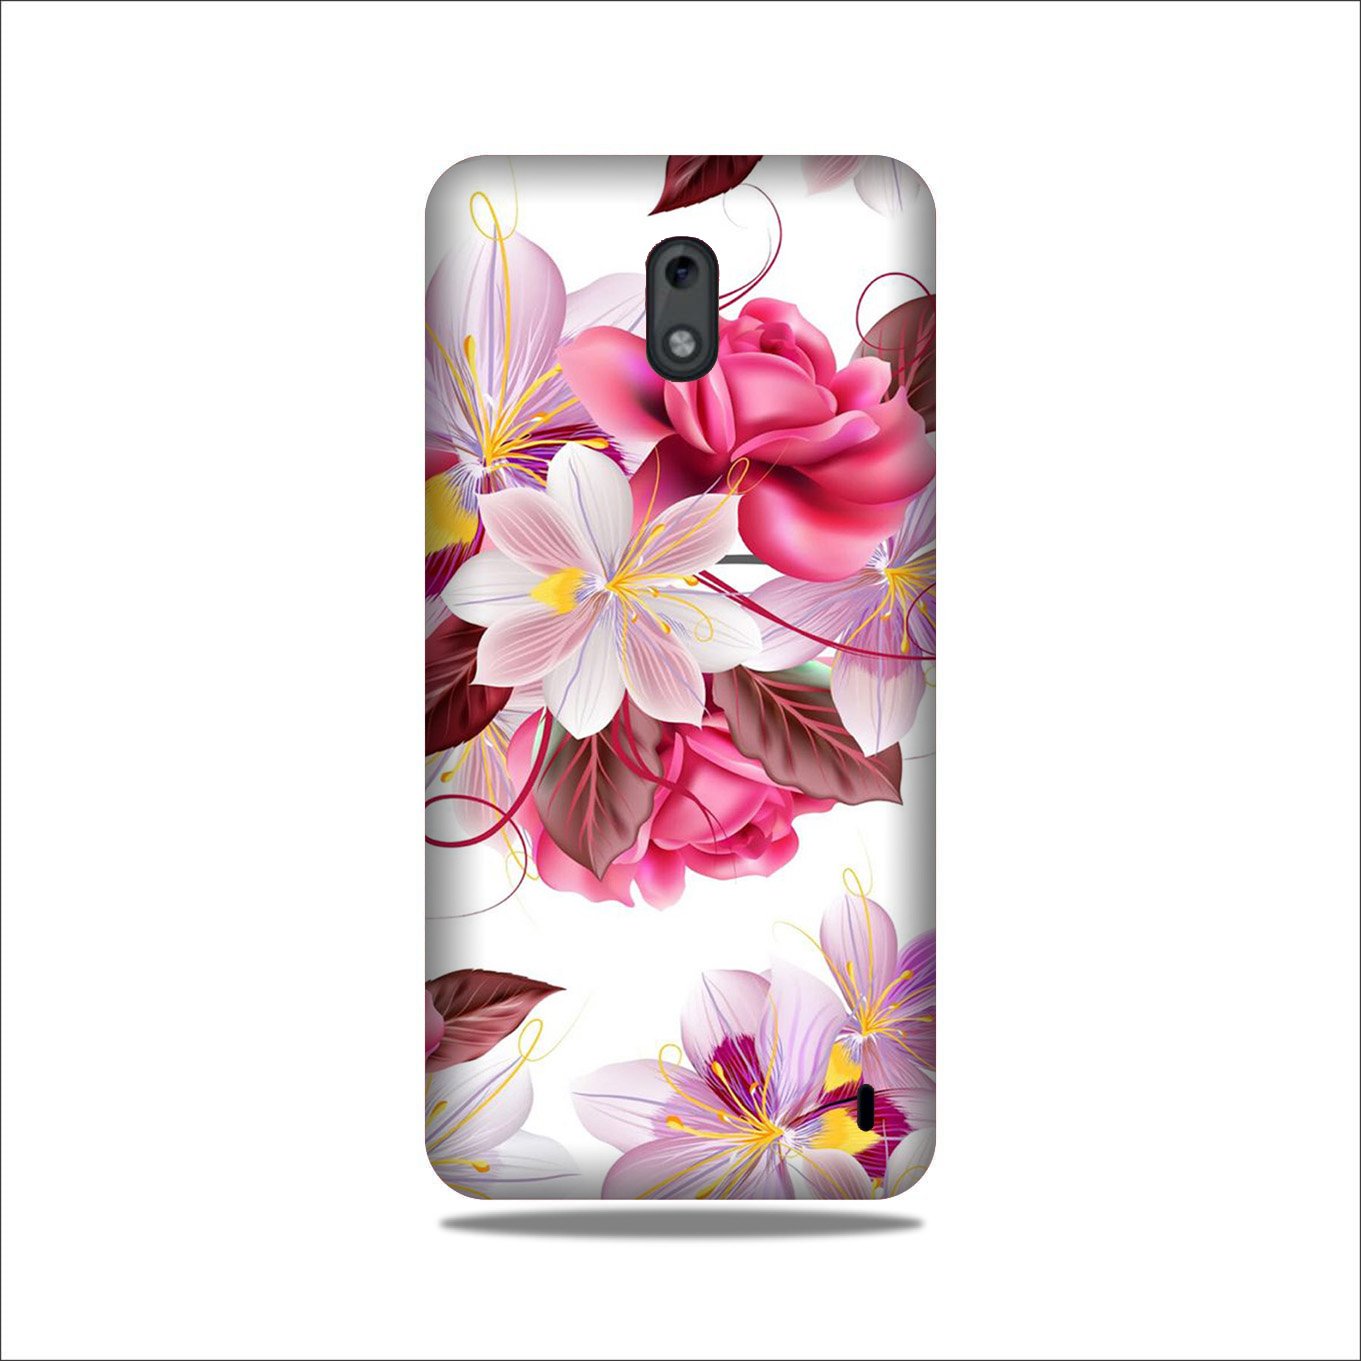 Beautiful flowers Case for Nokia 2